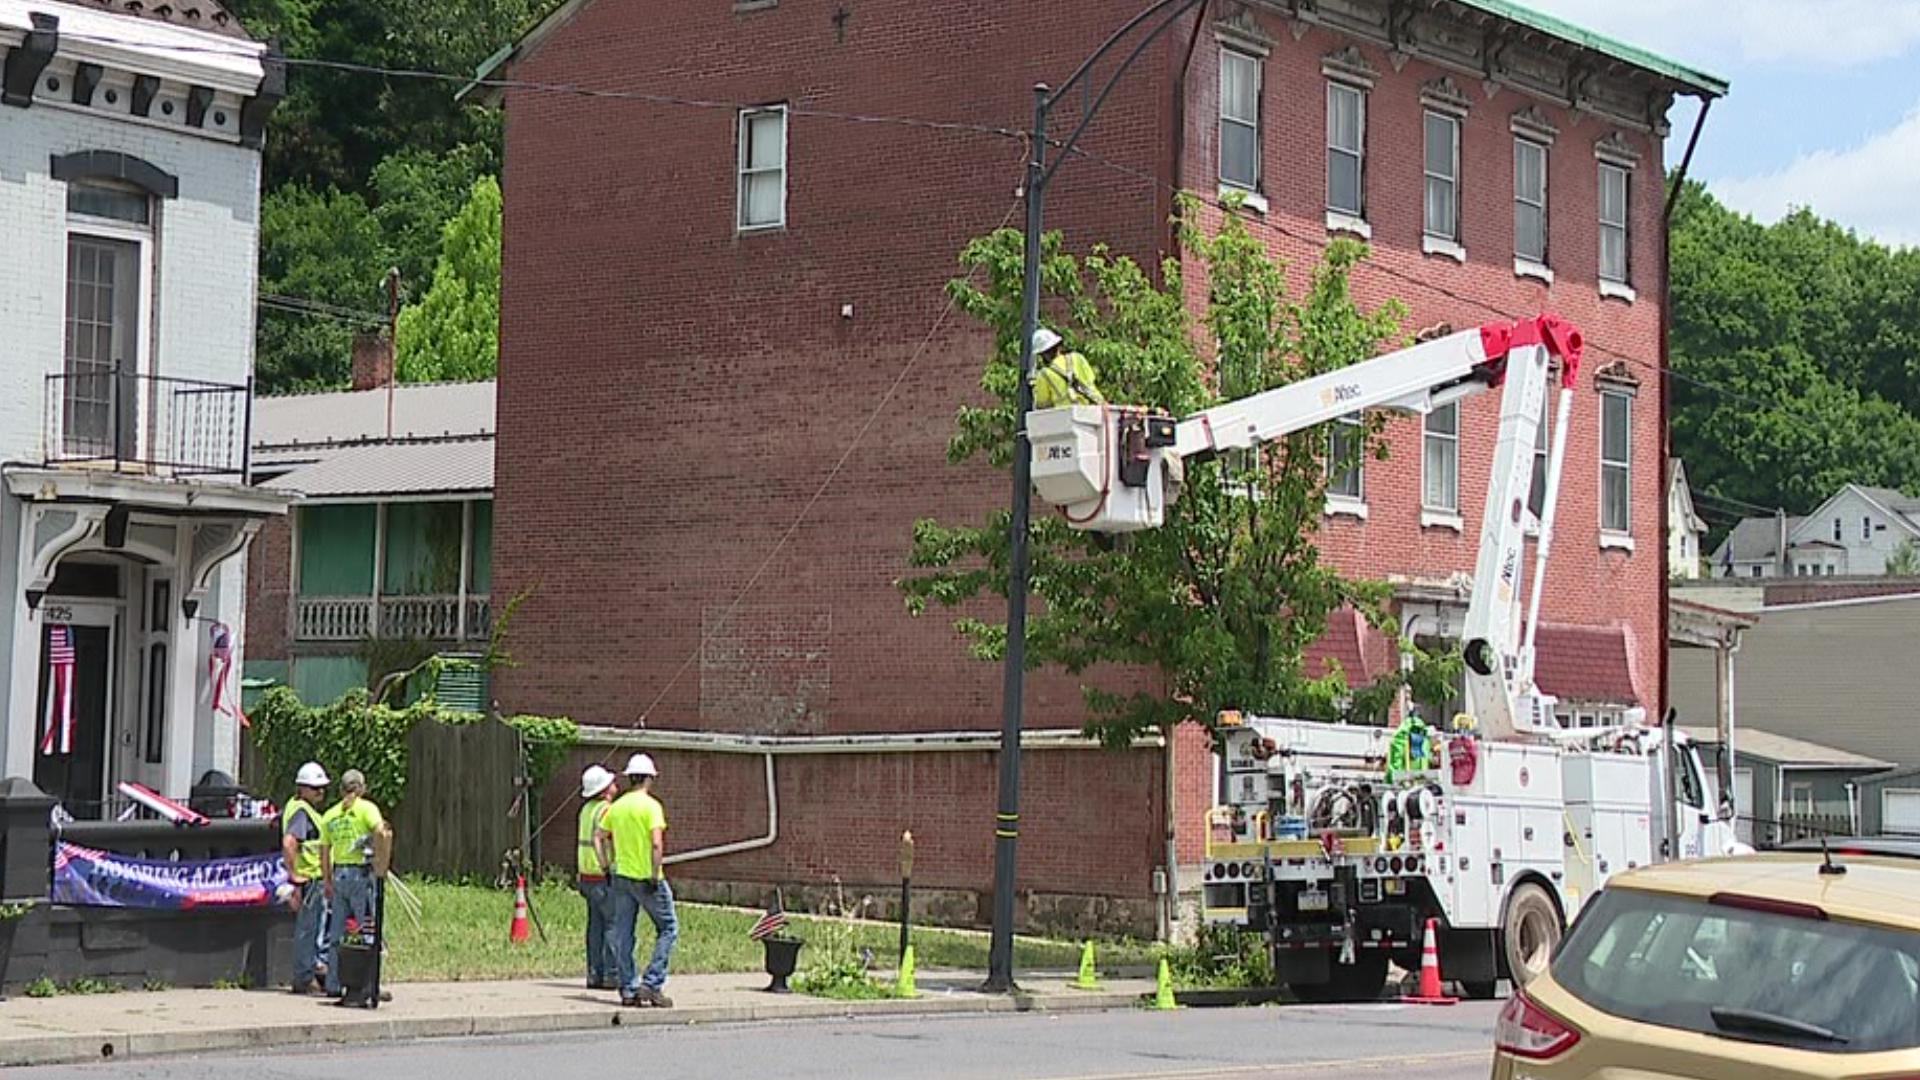 We first told you about Ashland's falling light poles on Tuesday on Newswatch 16. Less than 24 hours later, crews from PPL are out replacing those problem poles.